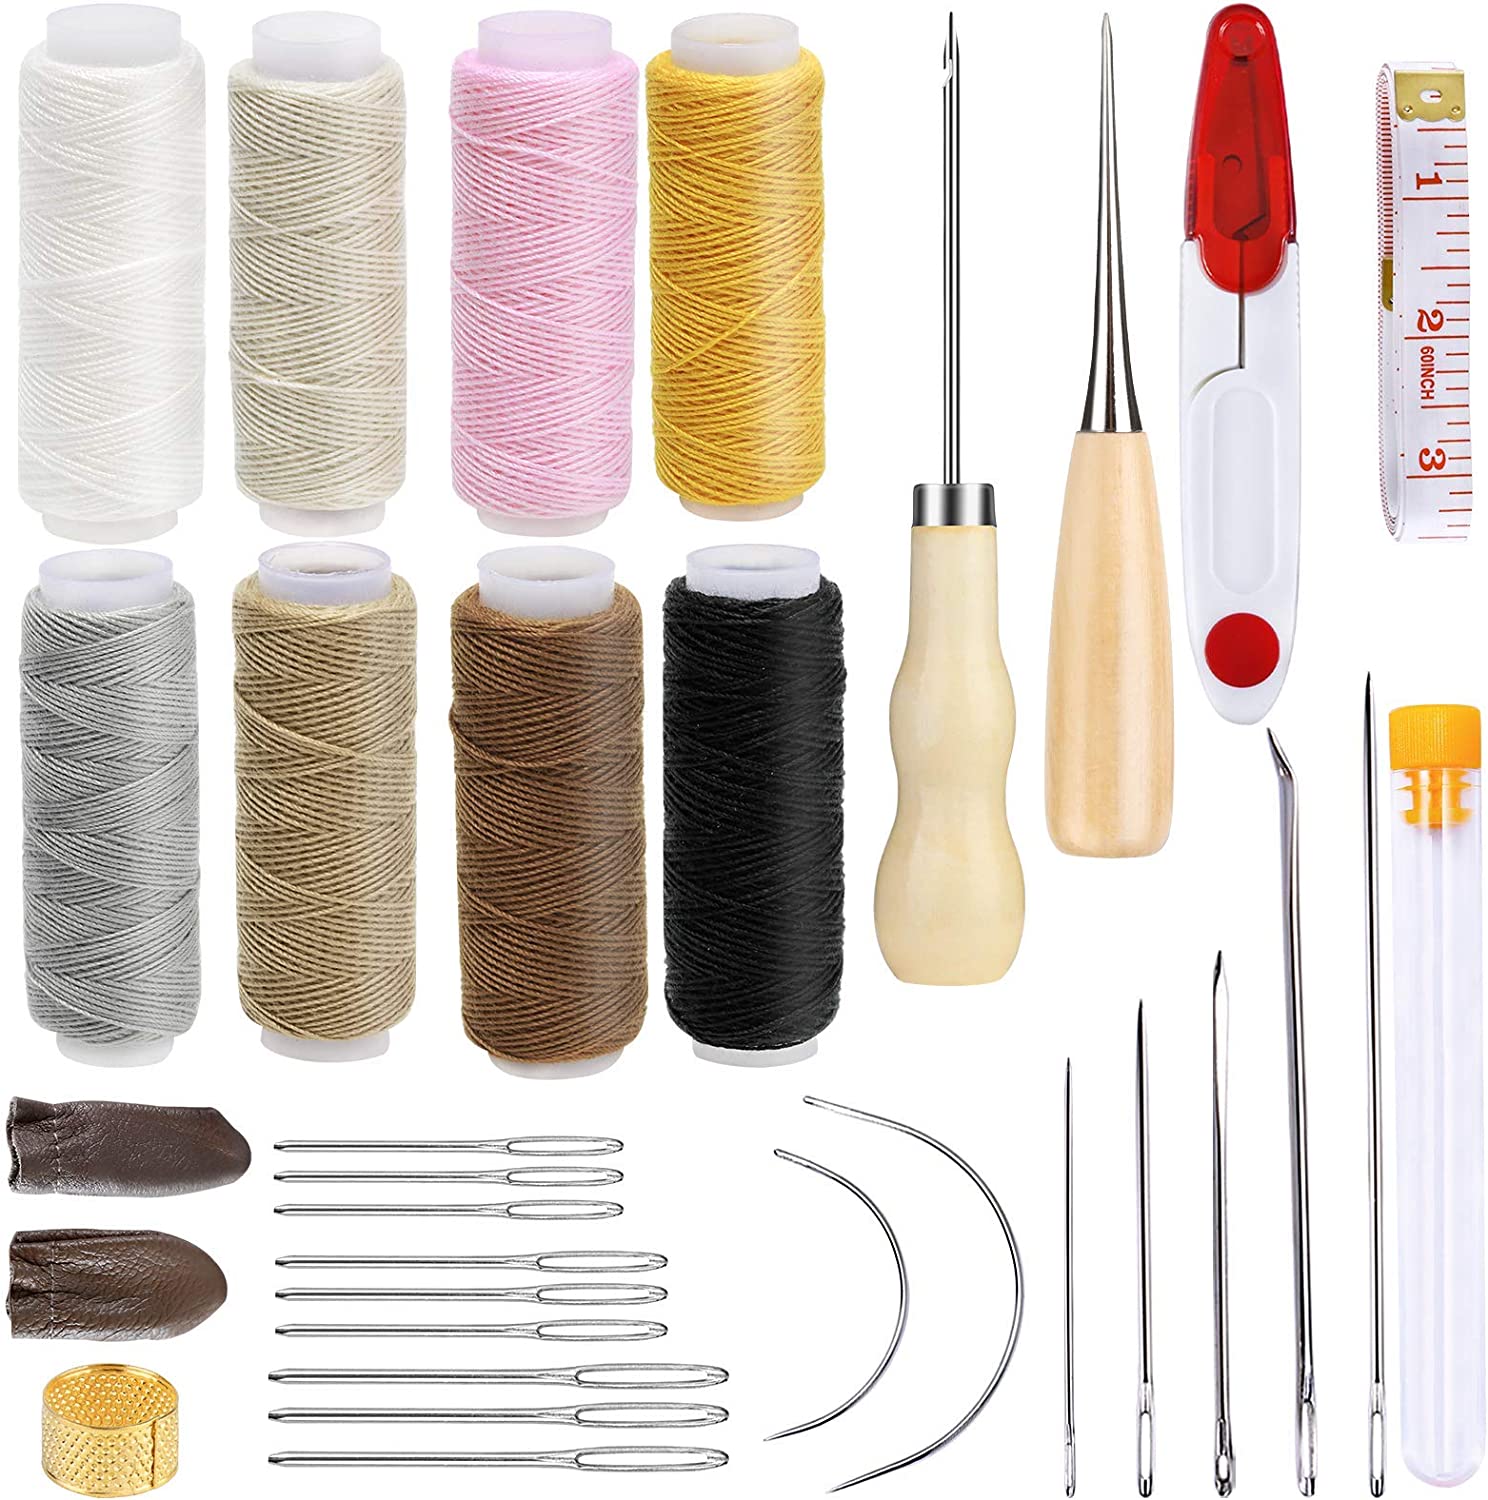 BUTUZE 32 Pcs Upholstery Repair Sewing Kit, Sewing Repair Kit with Storage Box, Sewing Thread, Large-Eye Stitching Needles, Sewing Awl, Leather